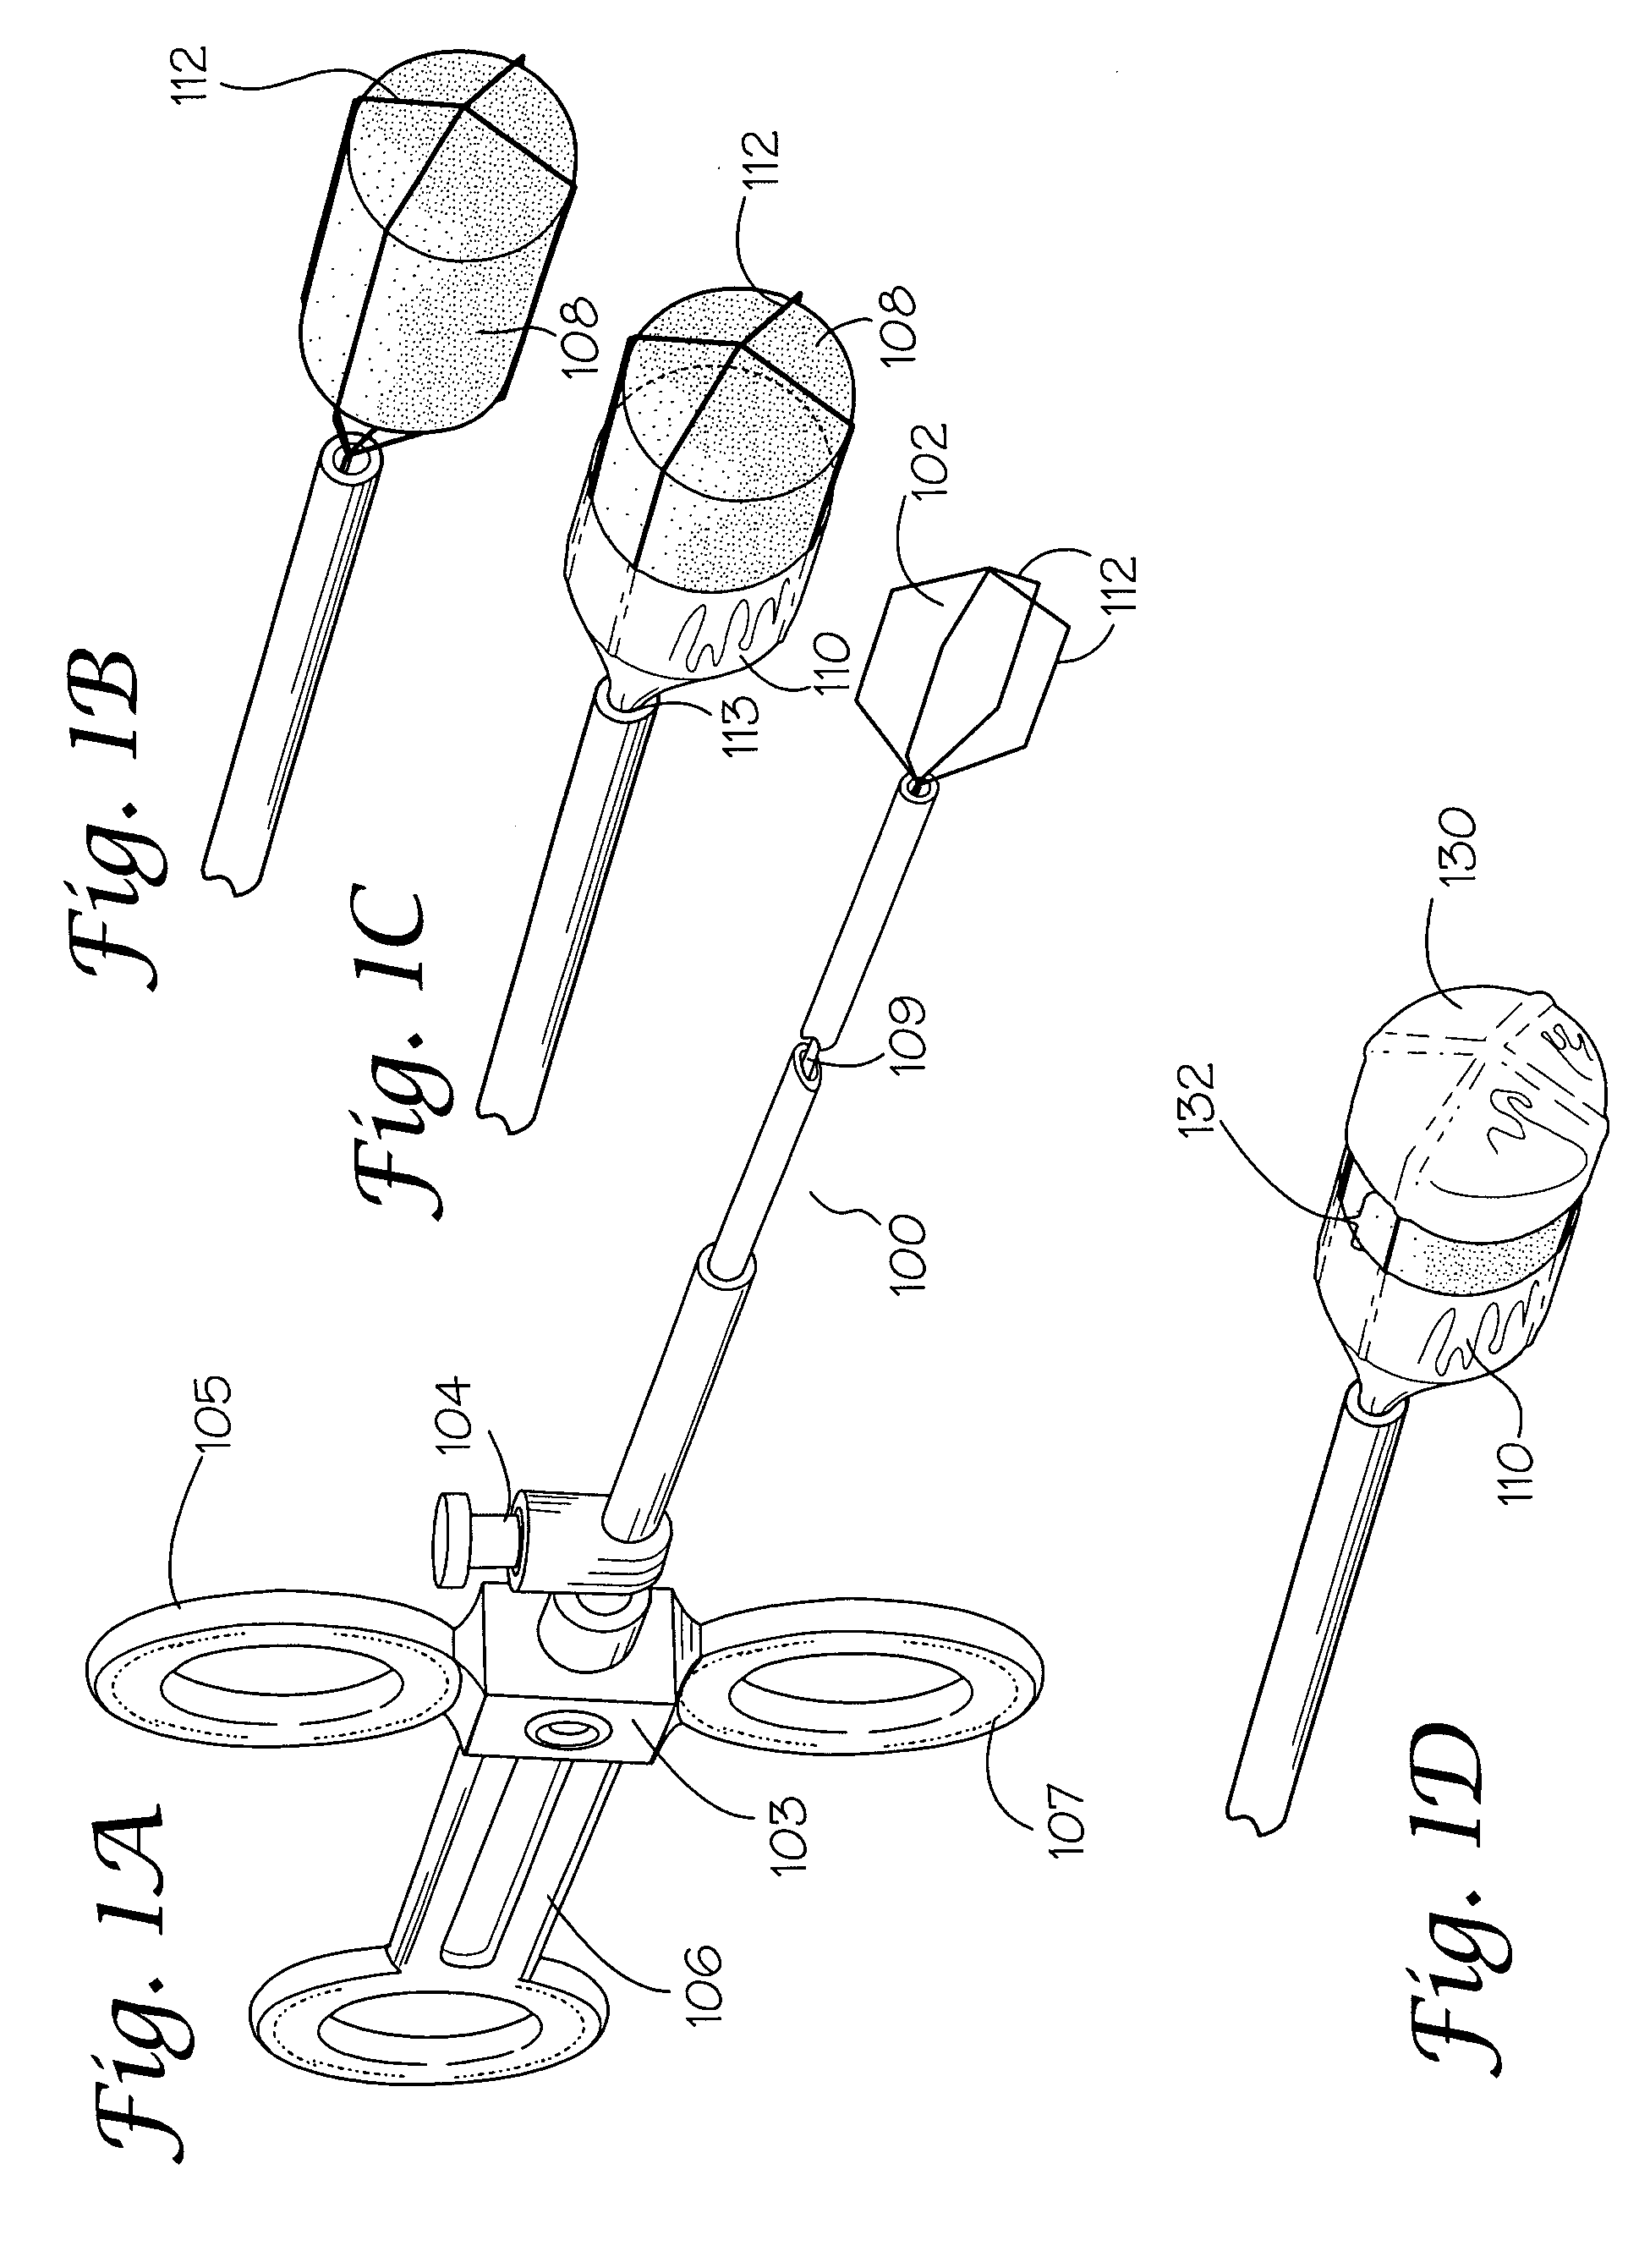 Medical liquid delivery device